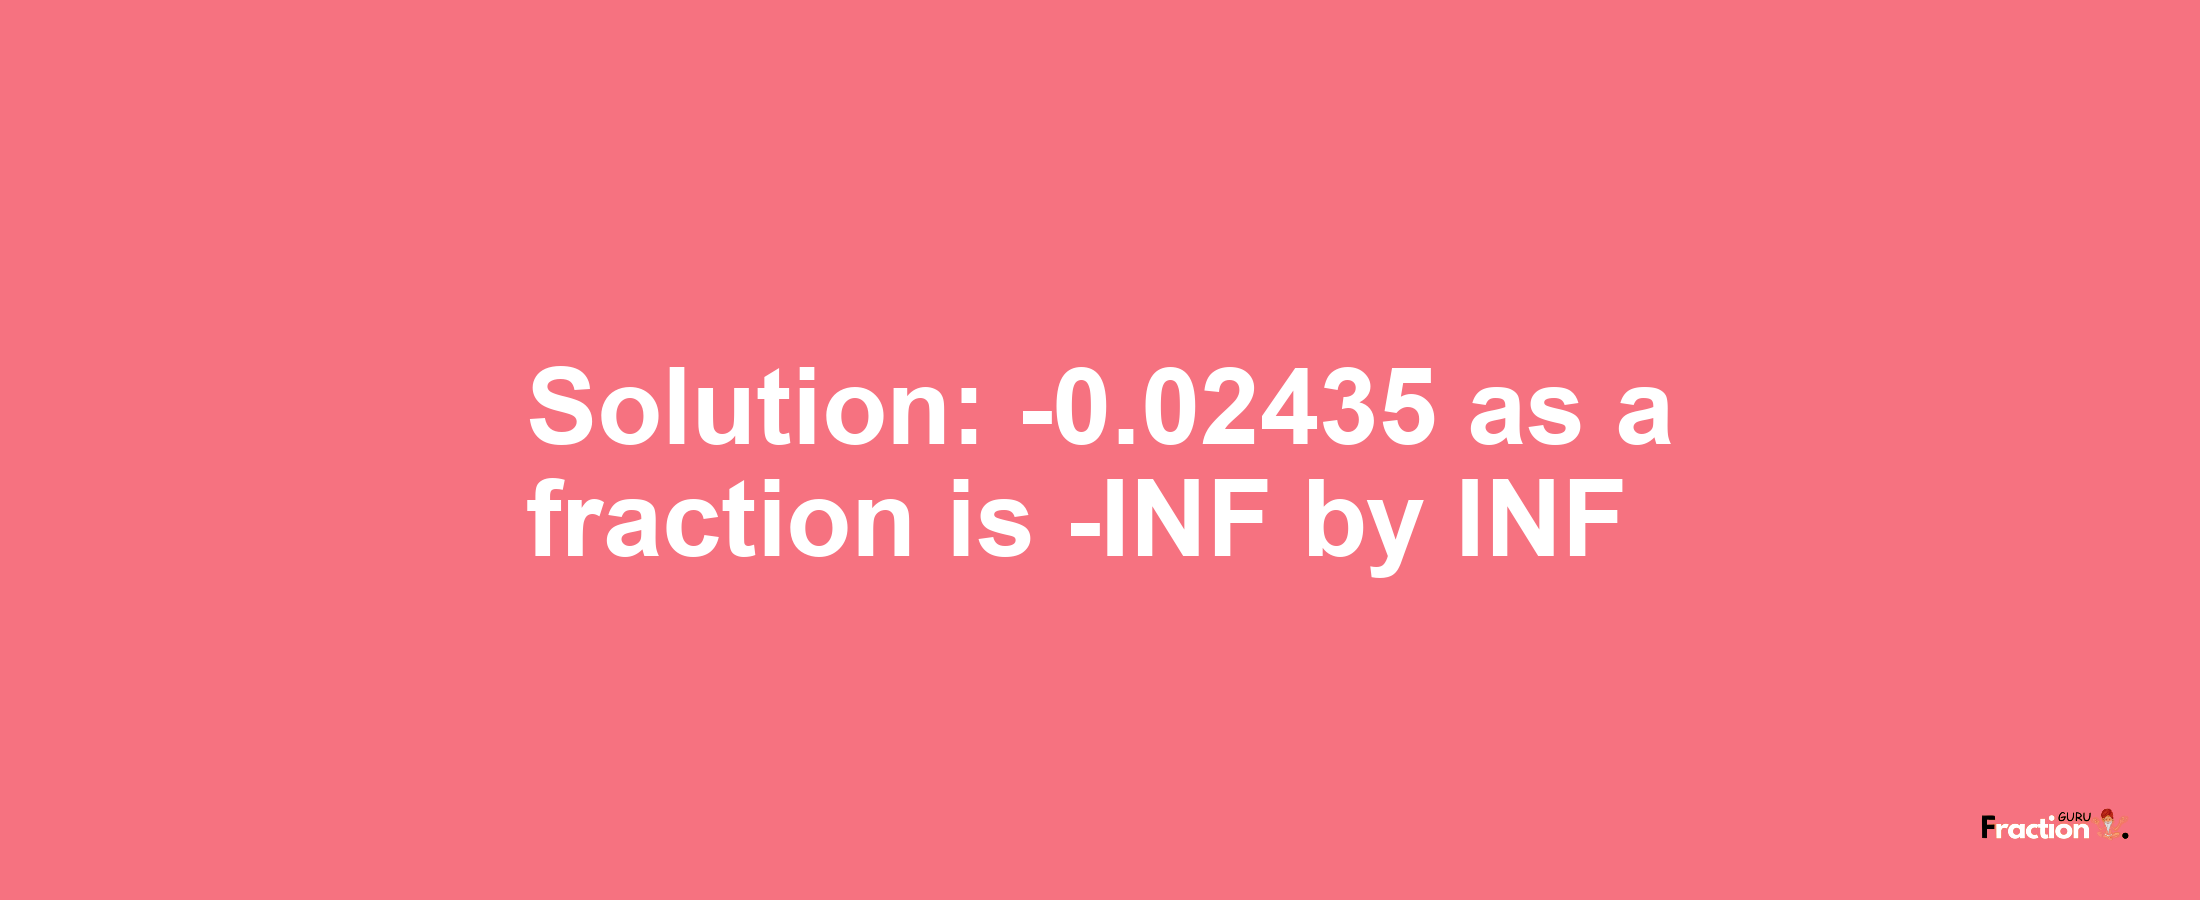 Solution:-0.02435 as a fraction is -INF/INF